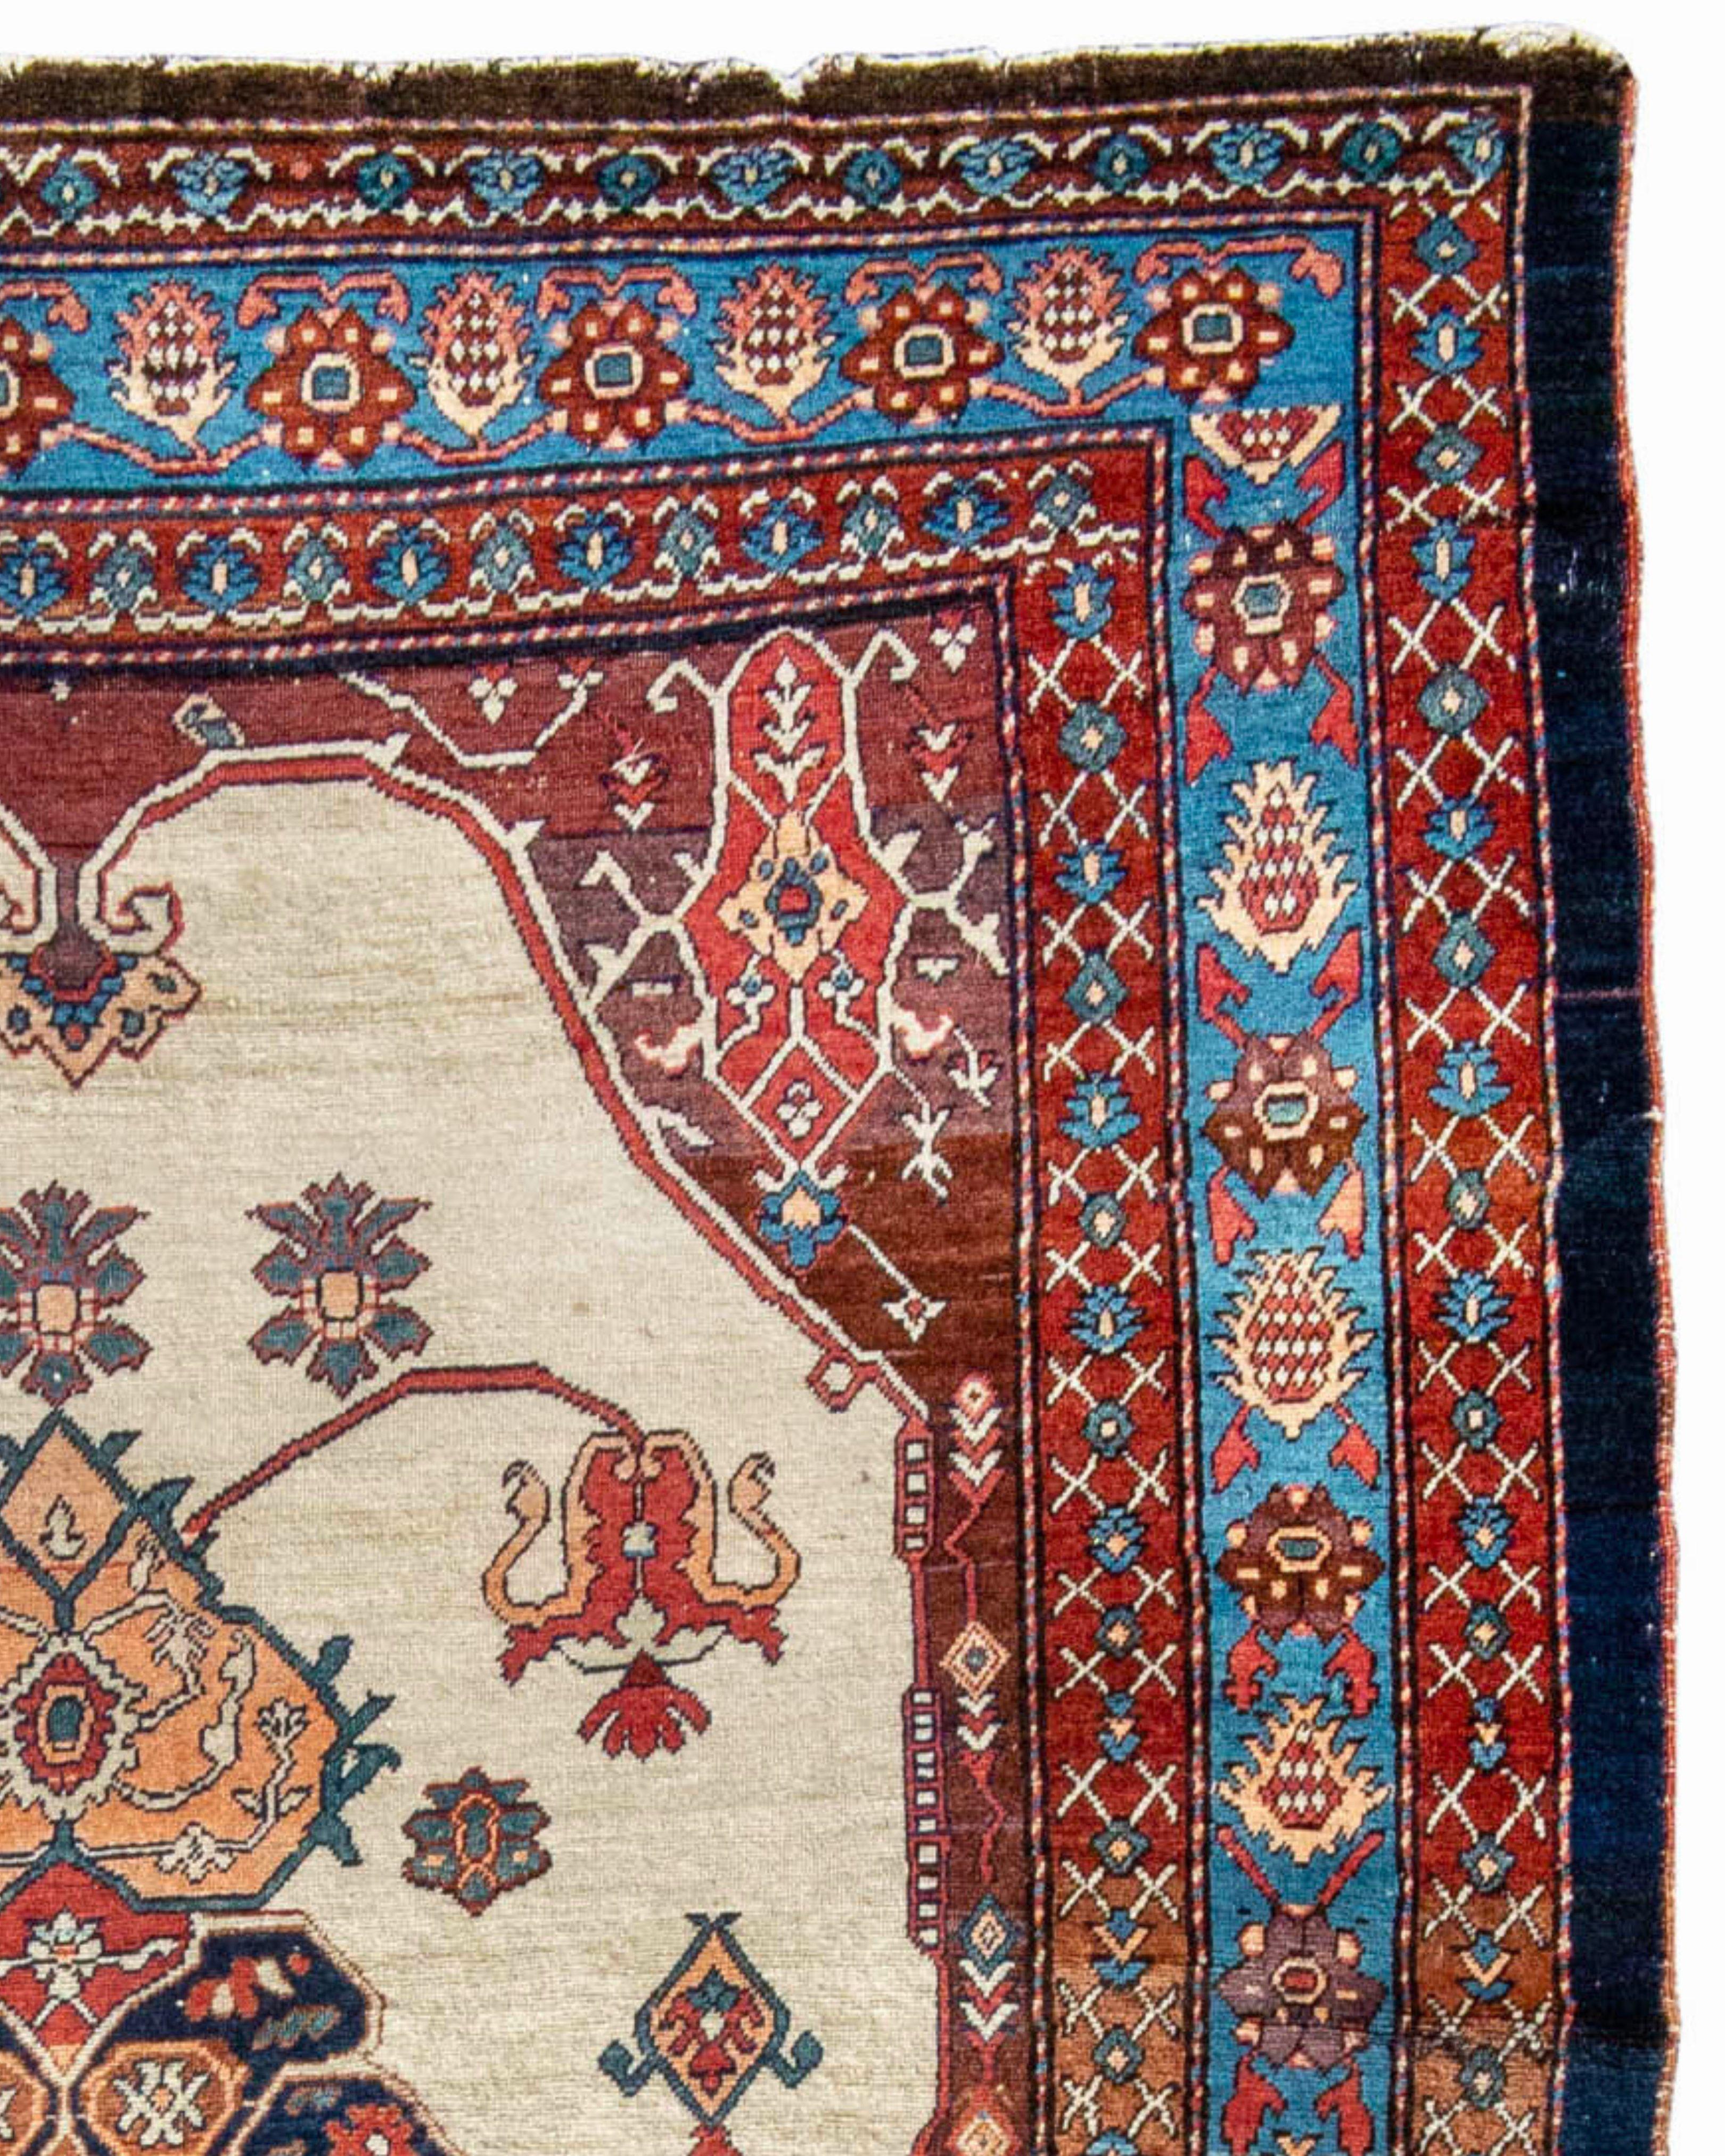 Antique Heriz Rug, Late 19th Century

Additional Information:
Dimensions: 5'2